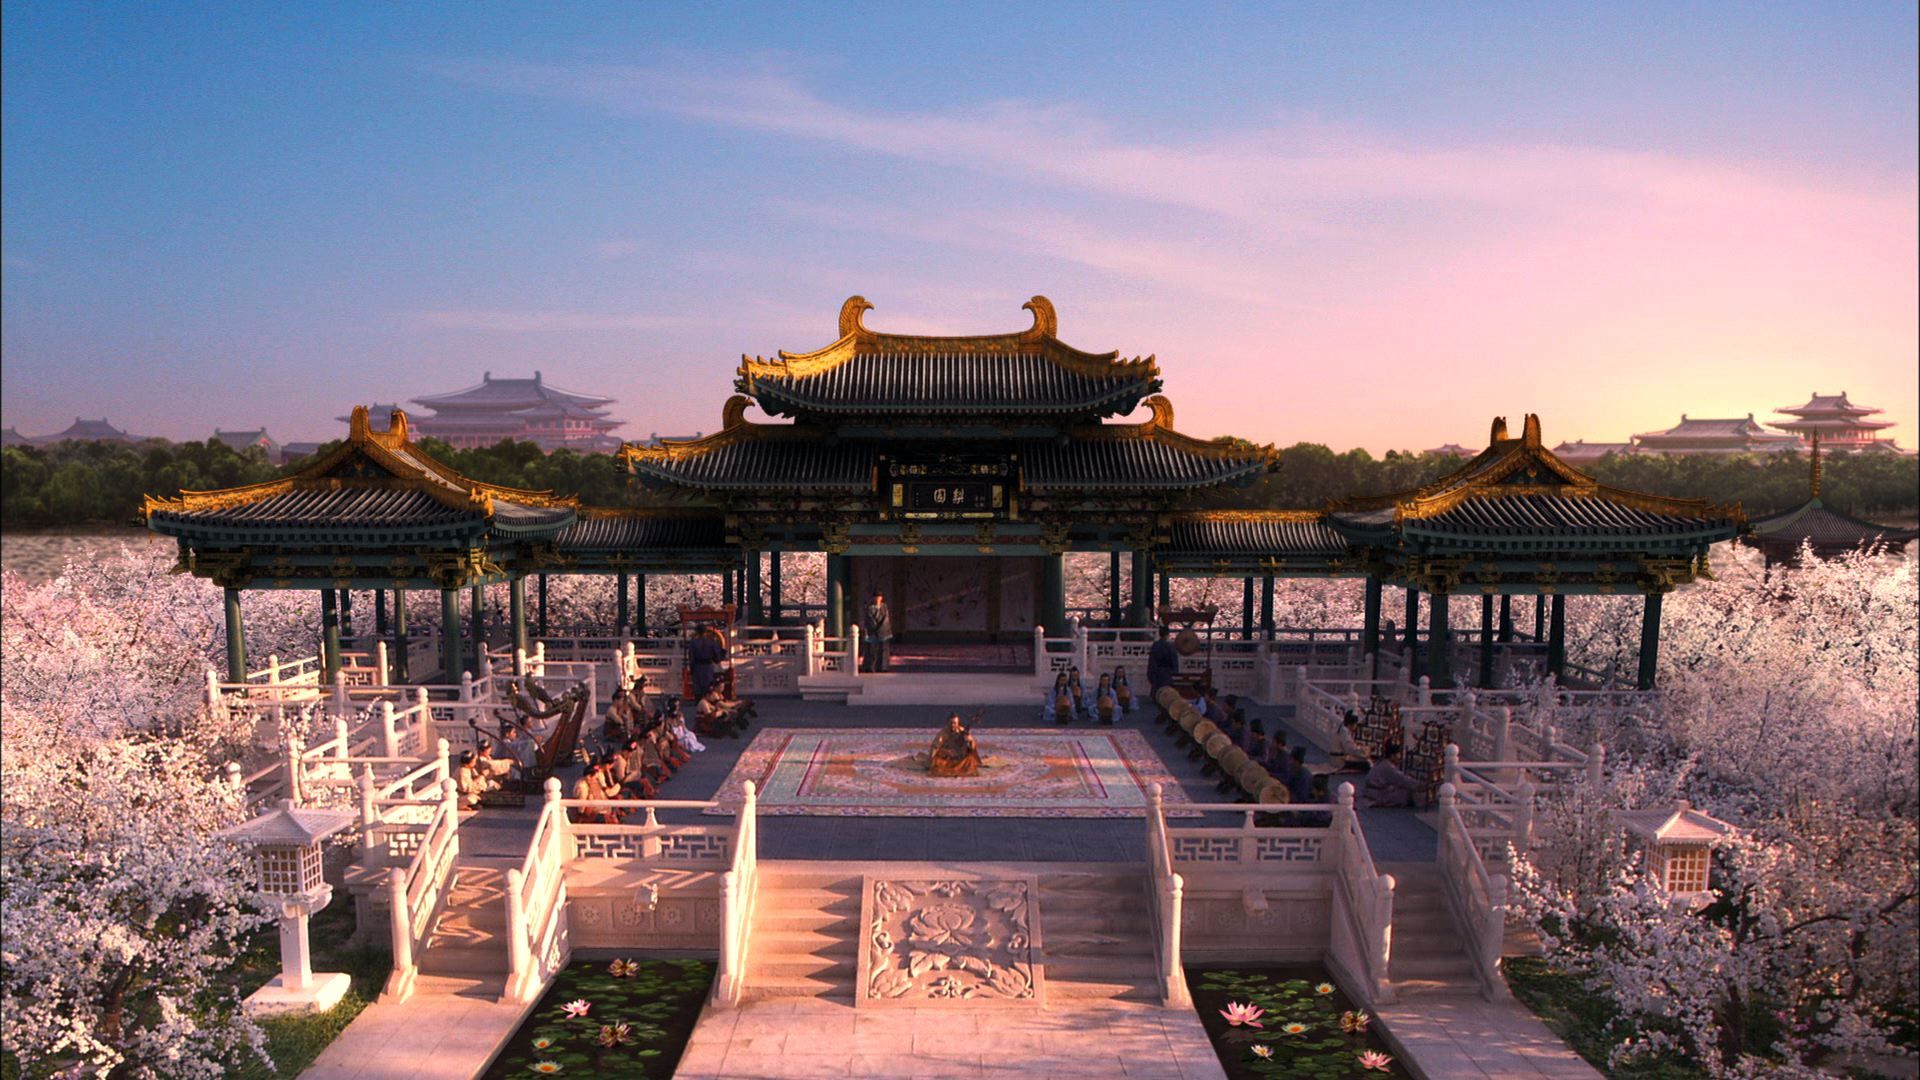 Daming Palace (?????) was the grandest and most significant palace complex in Xi'an2